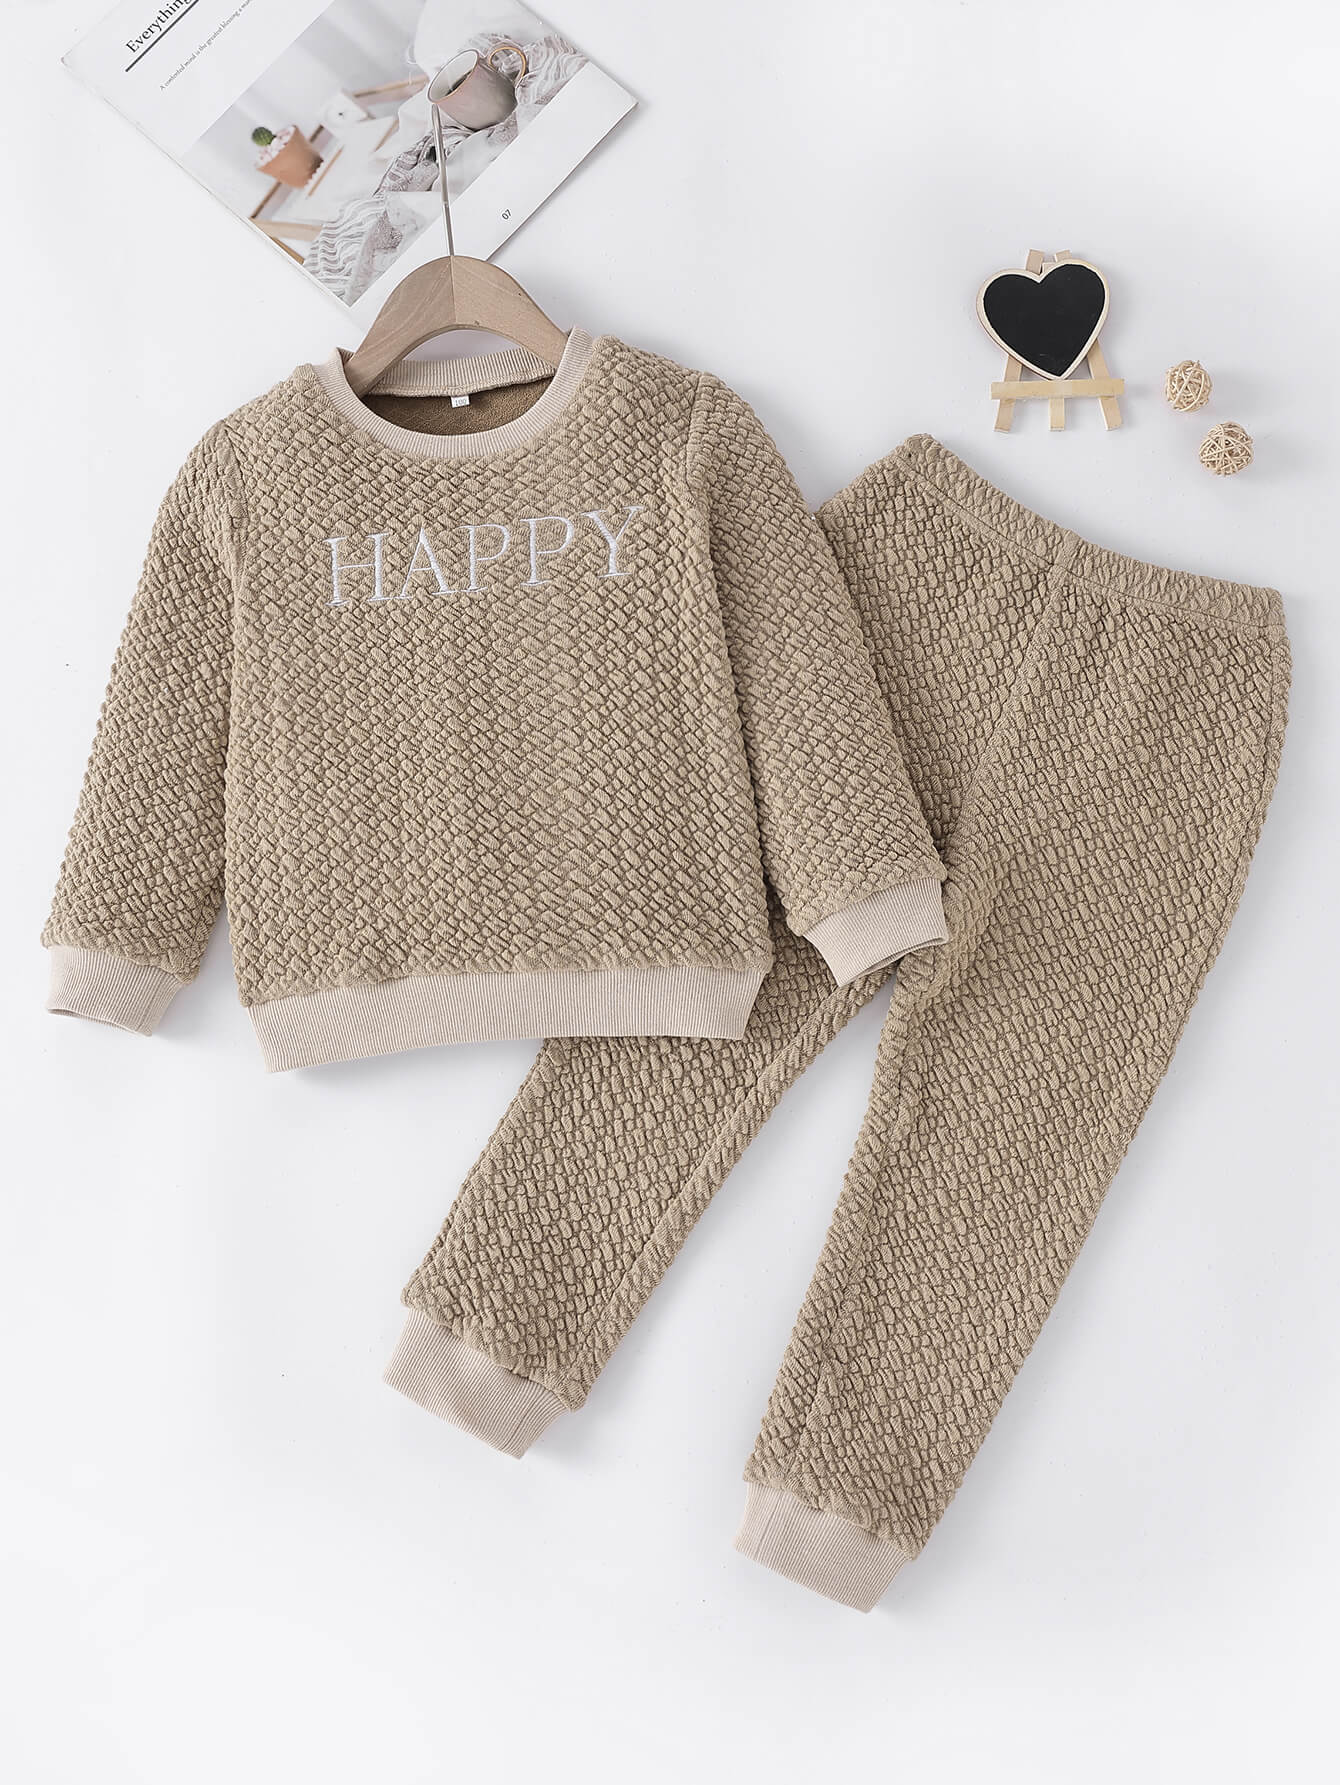 Kids HAPPY Textured Top and Joggers Set_1